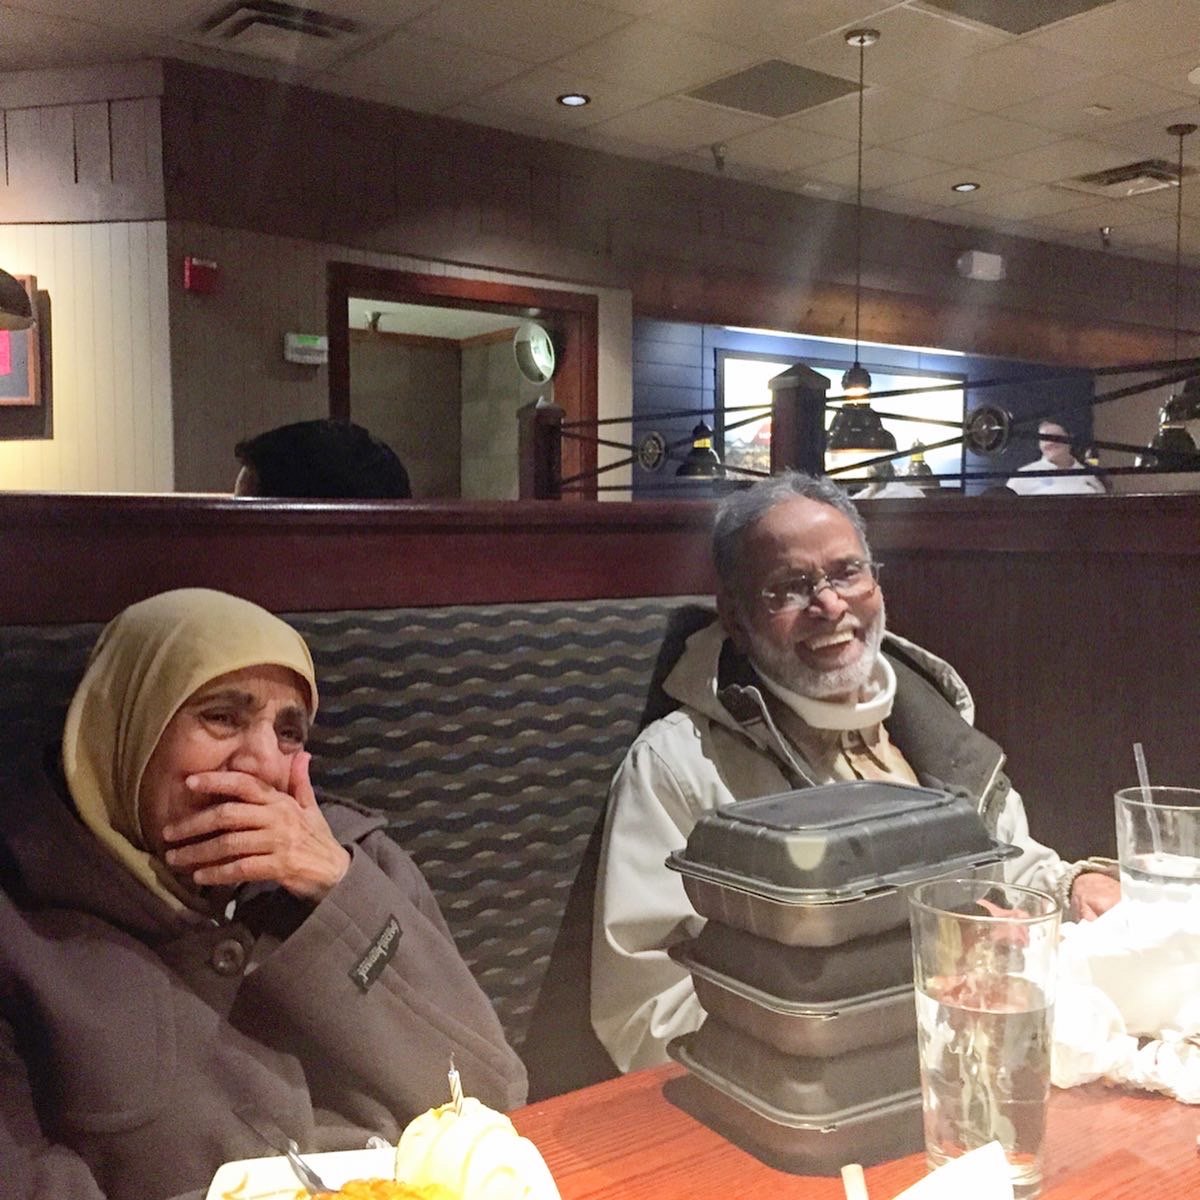 A woman in a hijab covers her mouth while laughing with an older gentleman sitting beside her